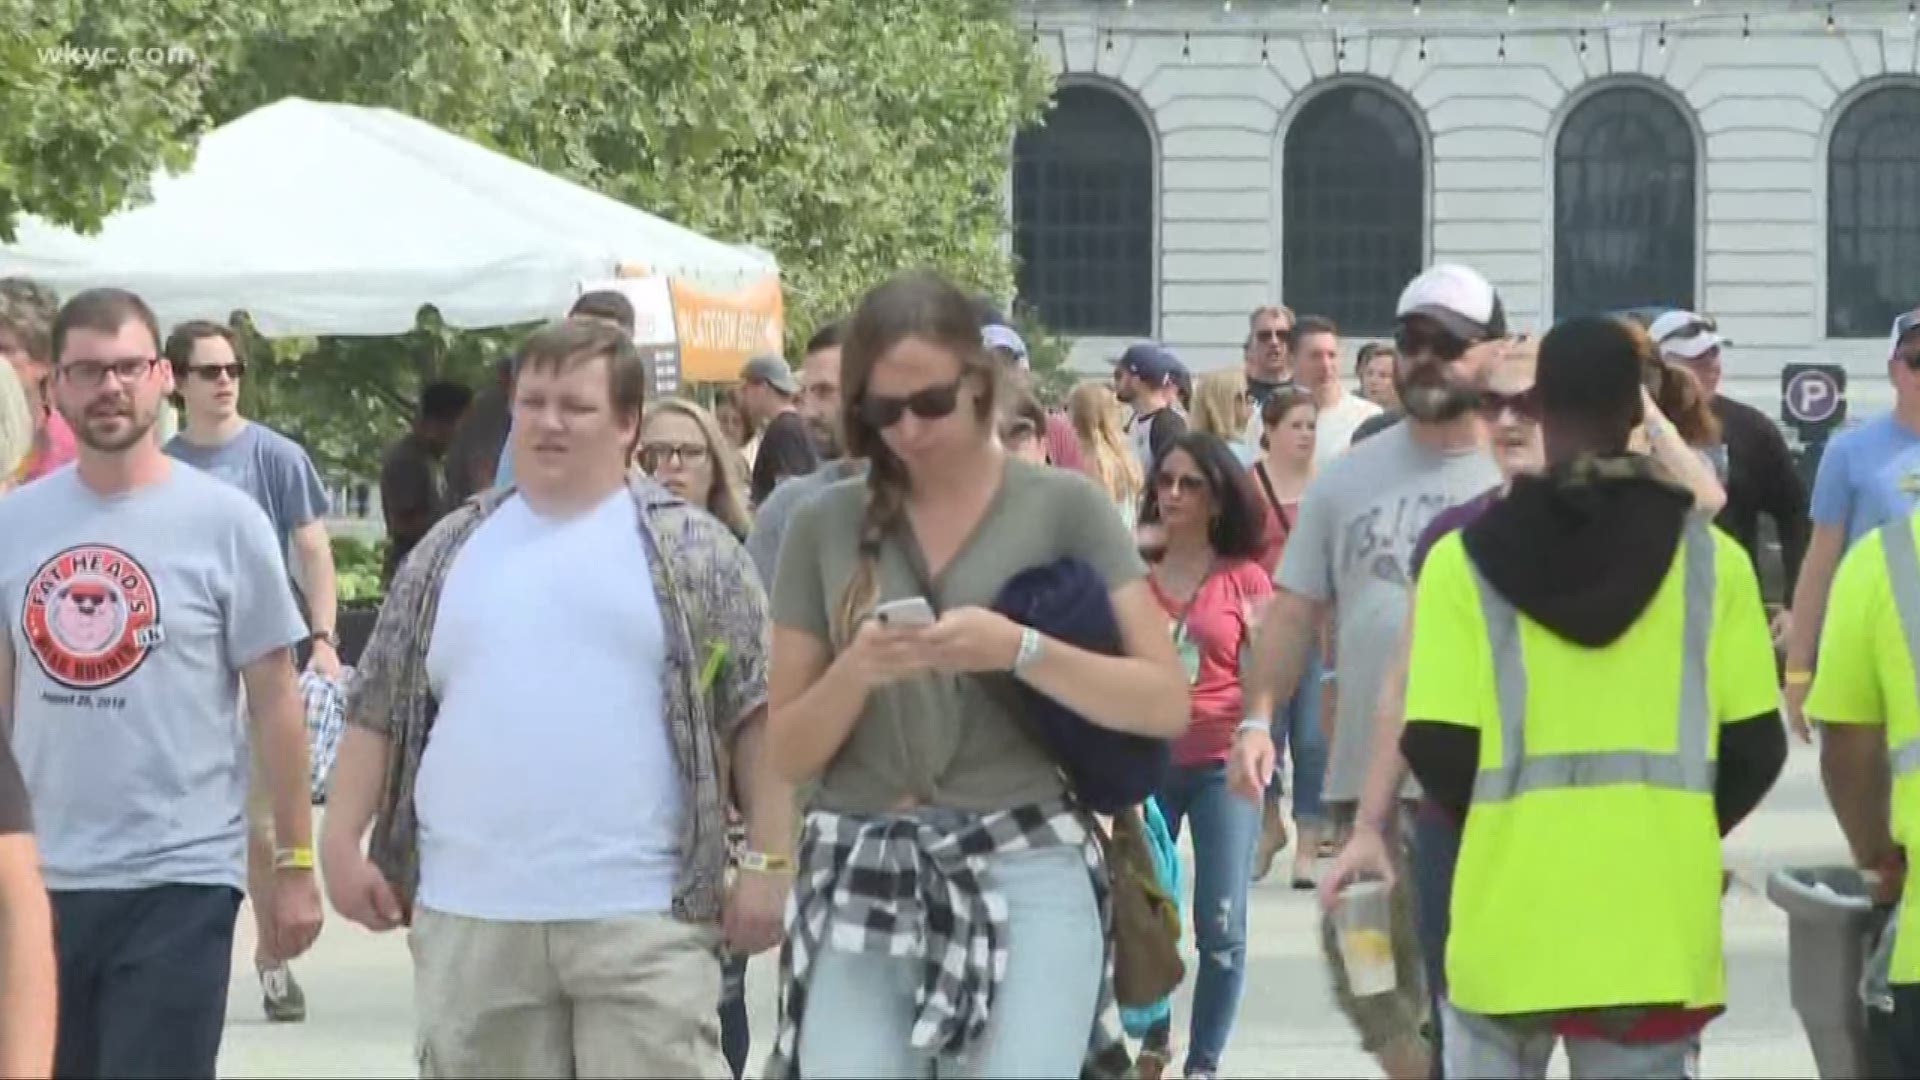 InCuya Music Festival kicks off in downtown Cleveland